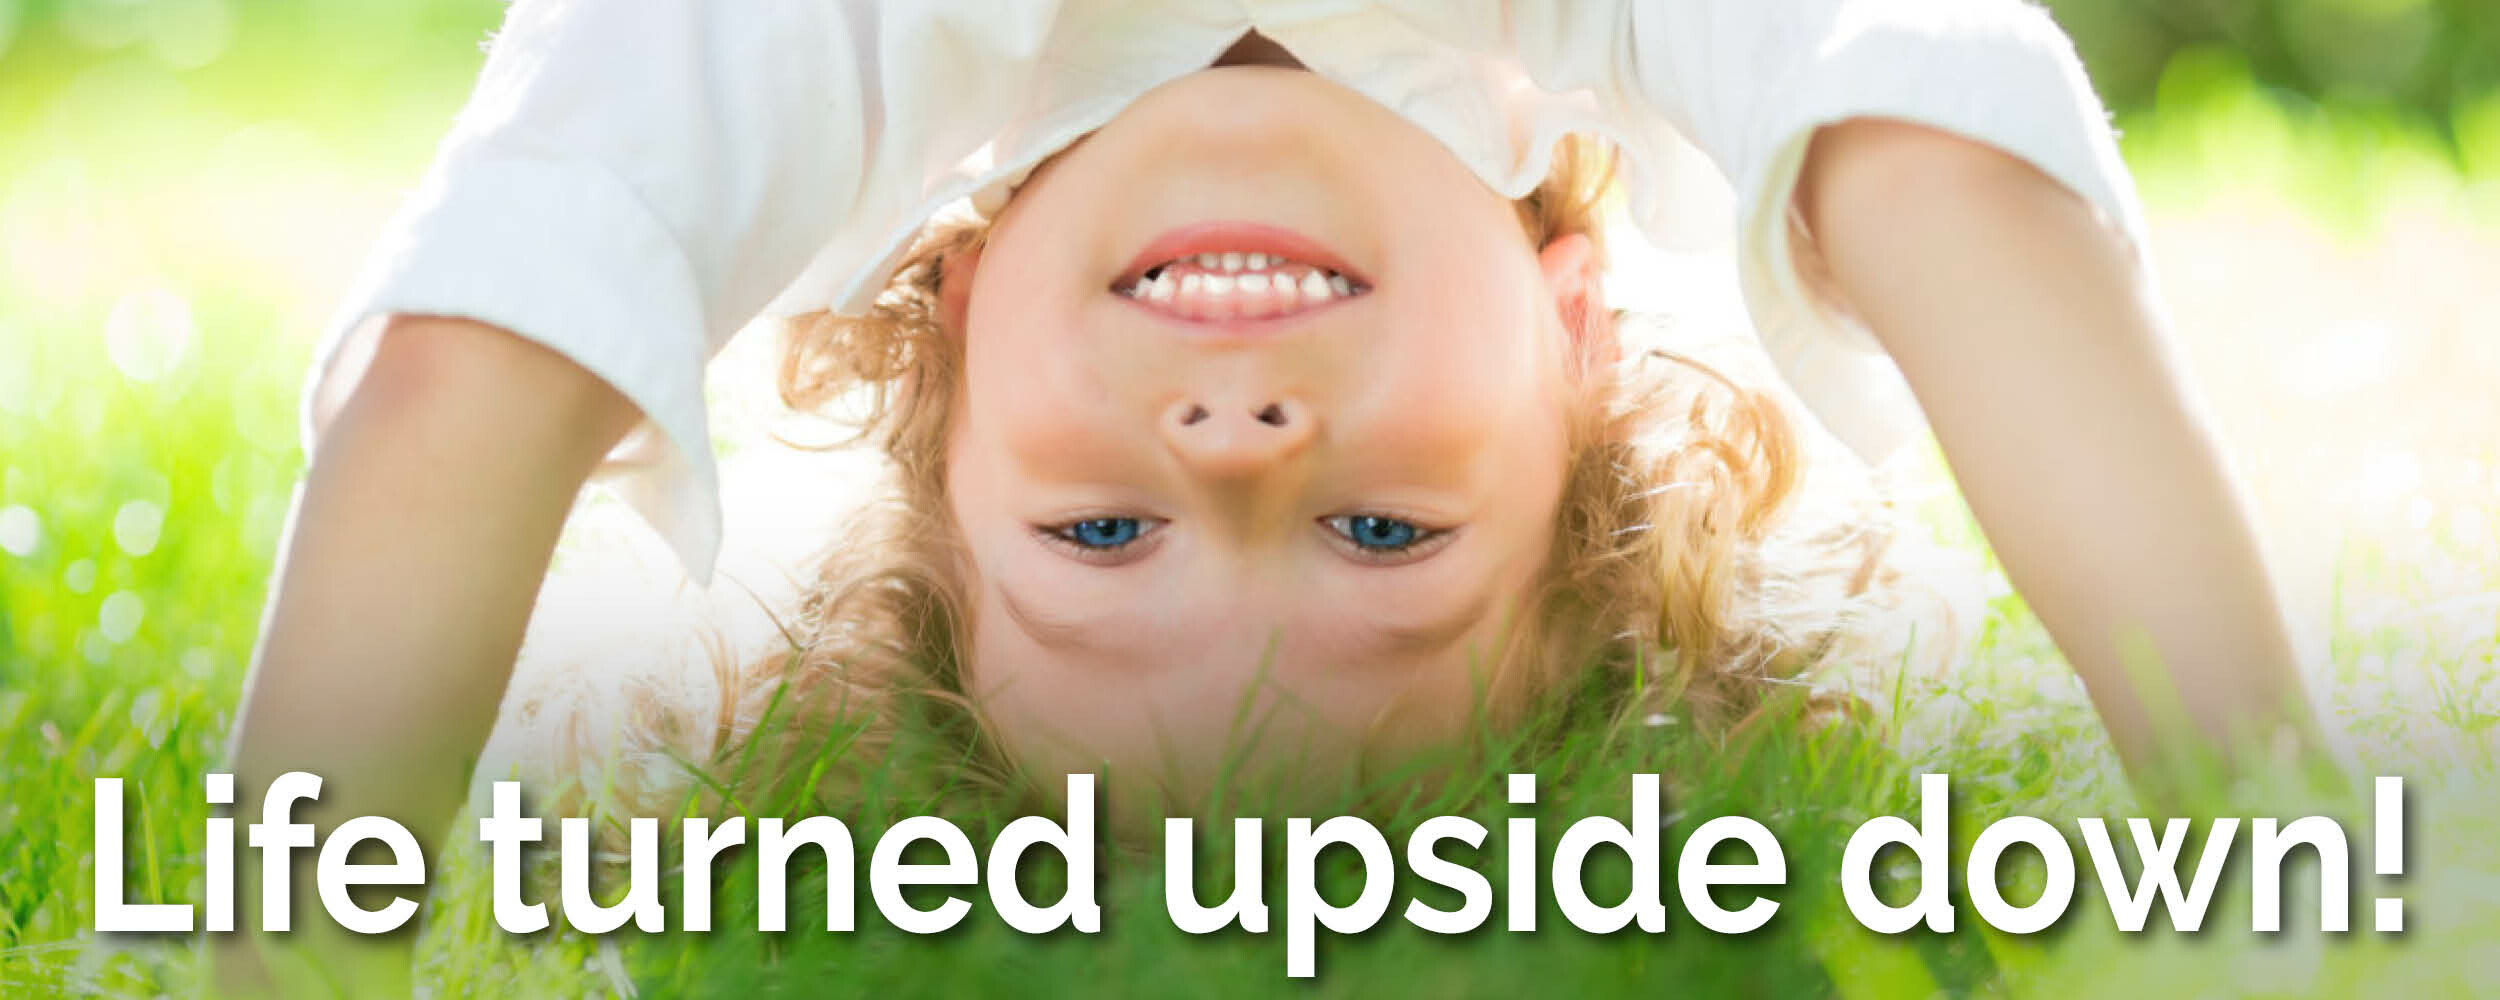 Life turned upside down, children's message